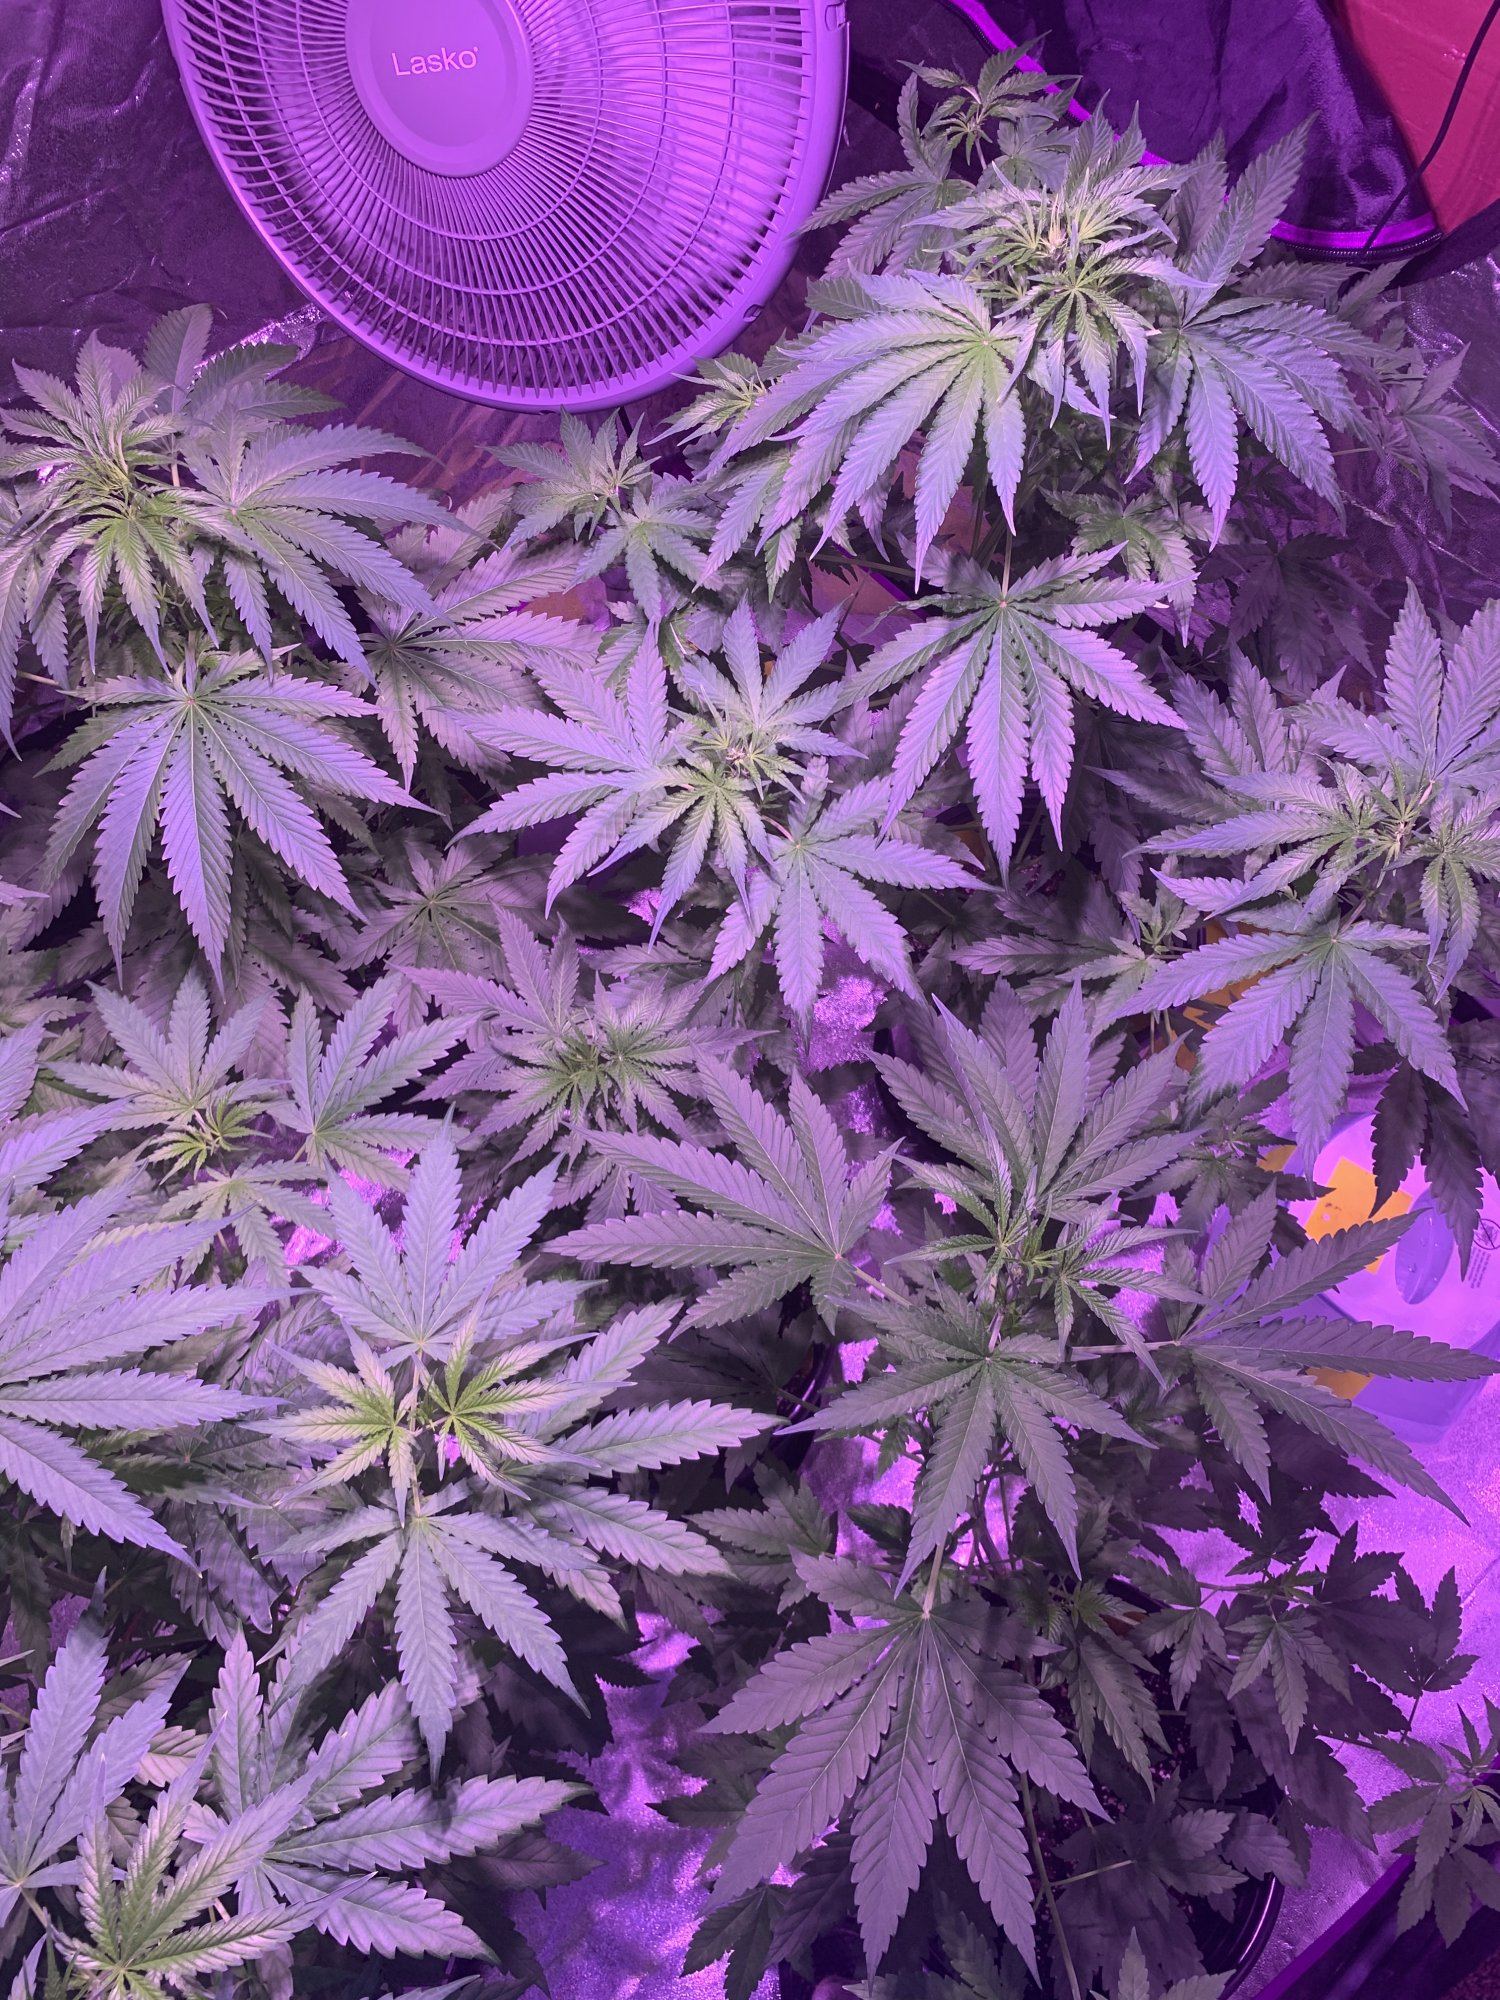 When should i flip these plants 2